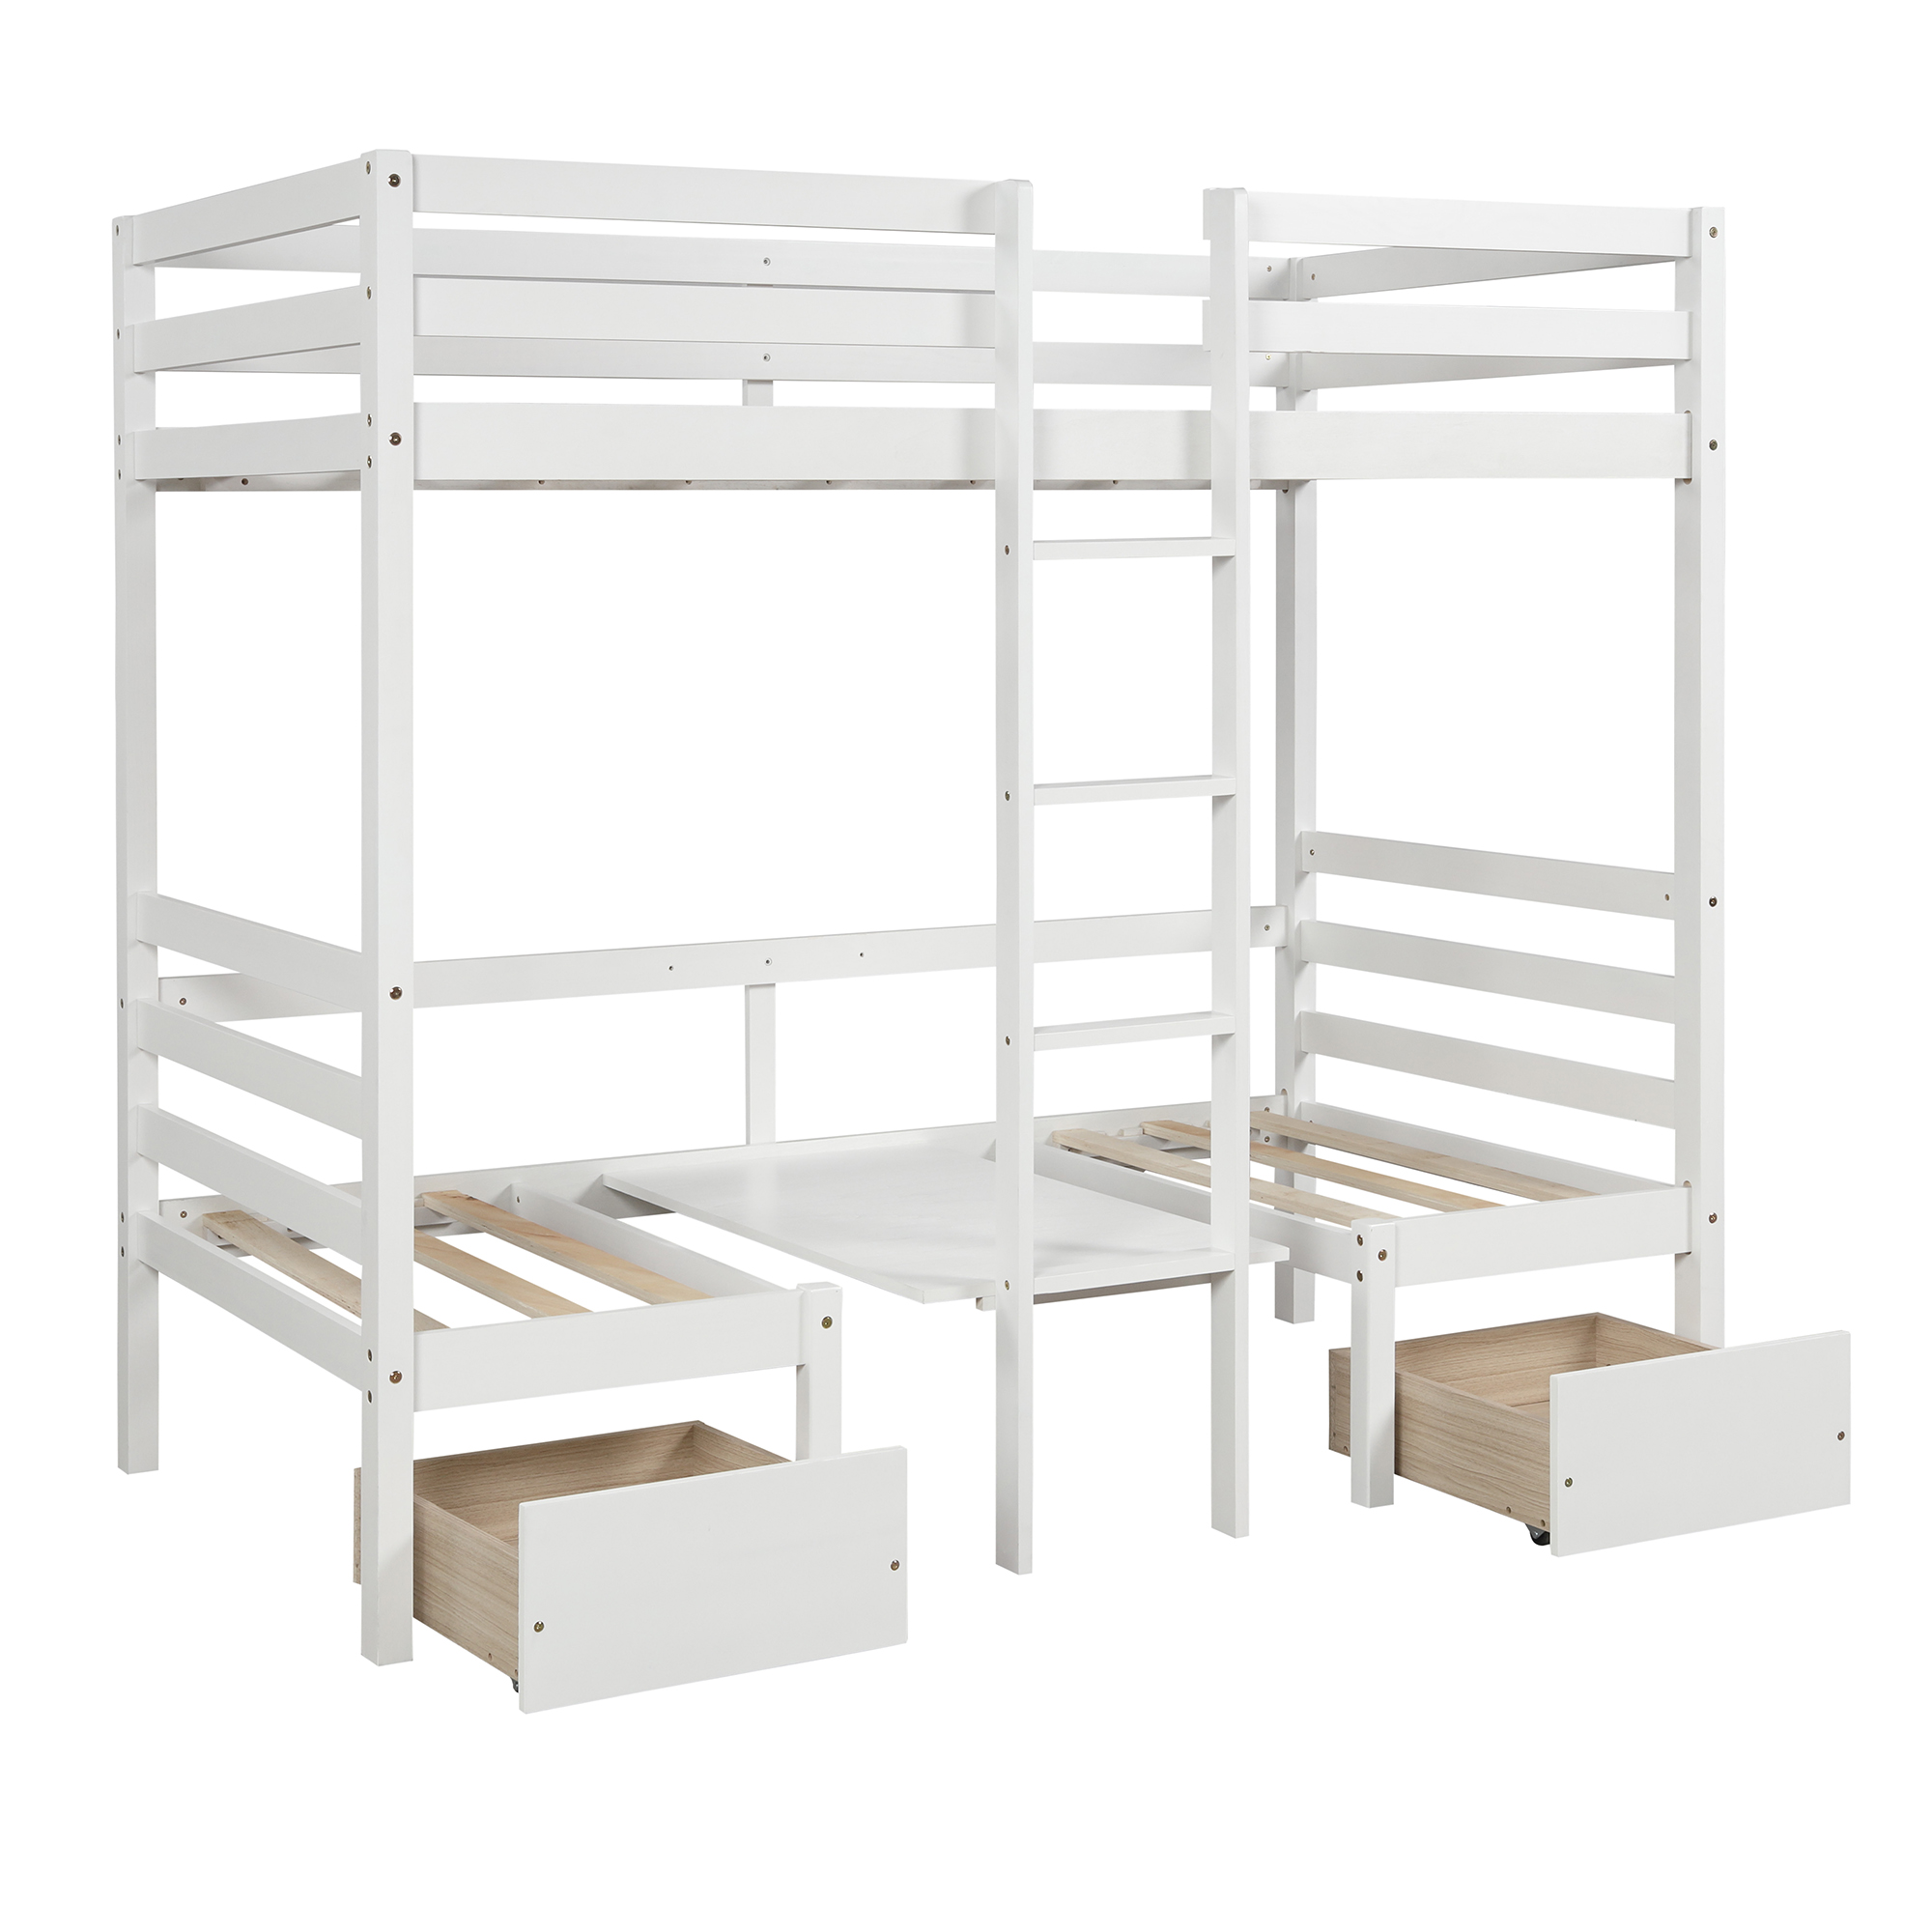 Functional Loft Bed (Turn Into Upper Bed And Down Desk, with Cushion Sets), Twin Size